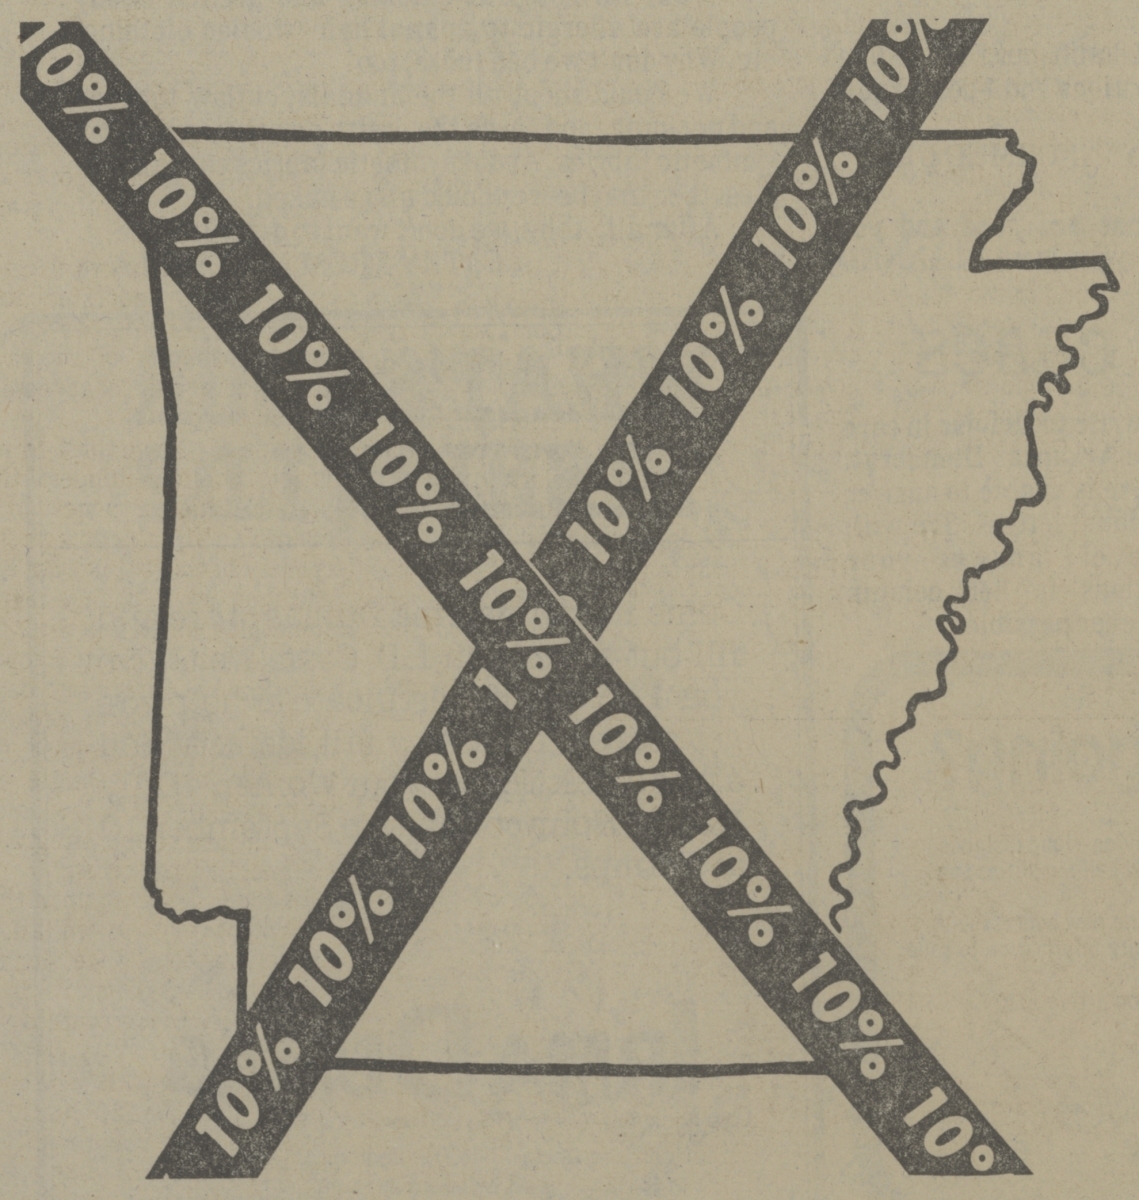 Newspaper clipping depicting two black strips with "10%" on them forming an  X over the outline of the state of Arkansas